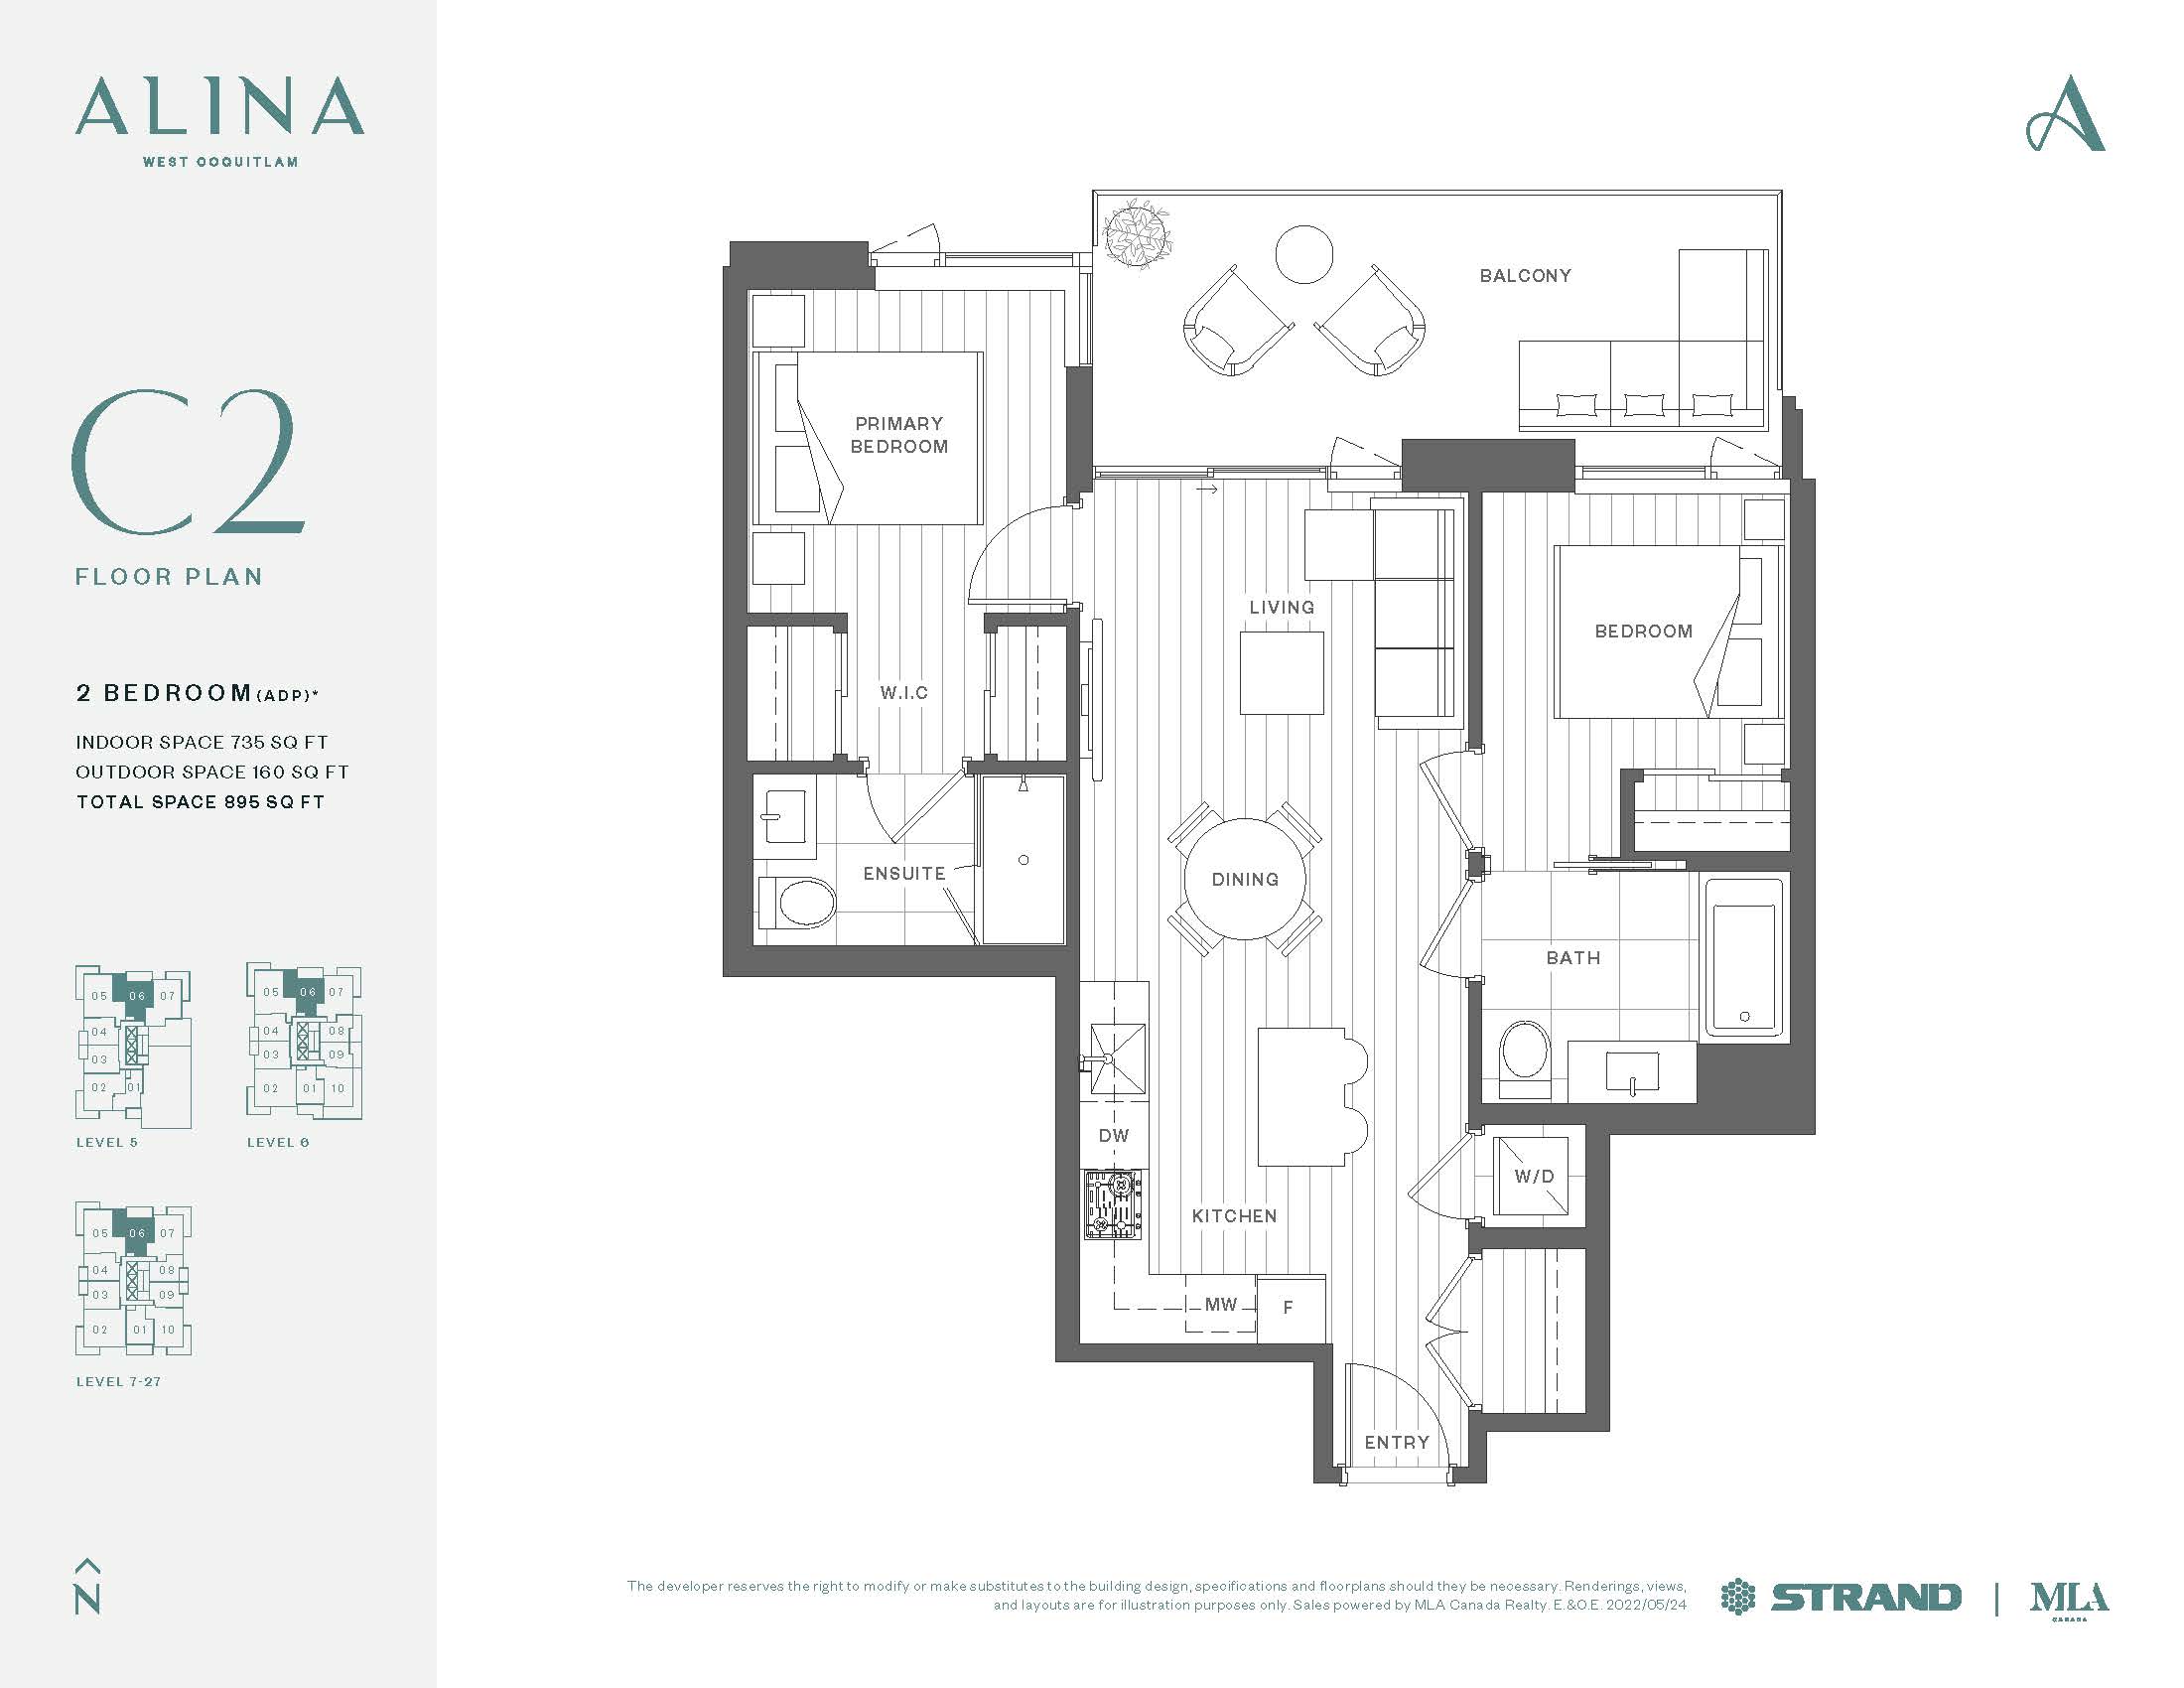  Floor Plan of Alina Condos with undefined beds